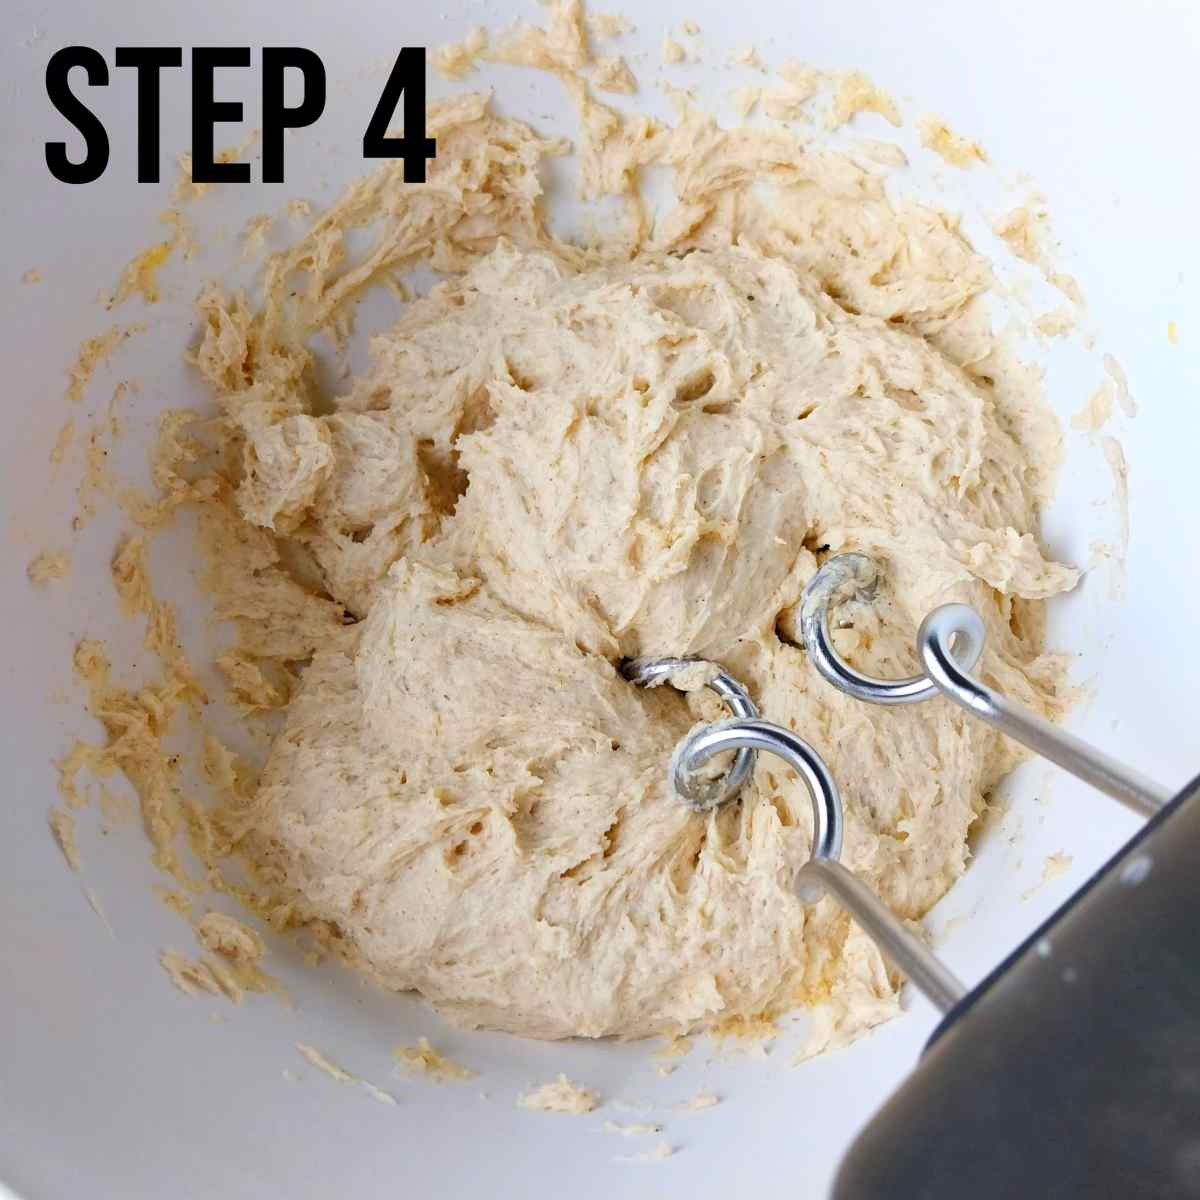 Mixing the dough with an electric mixer.